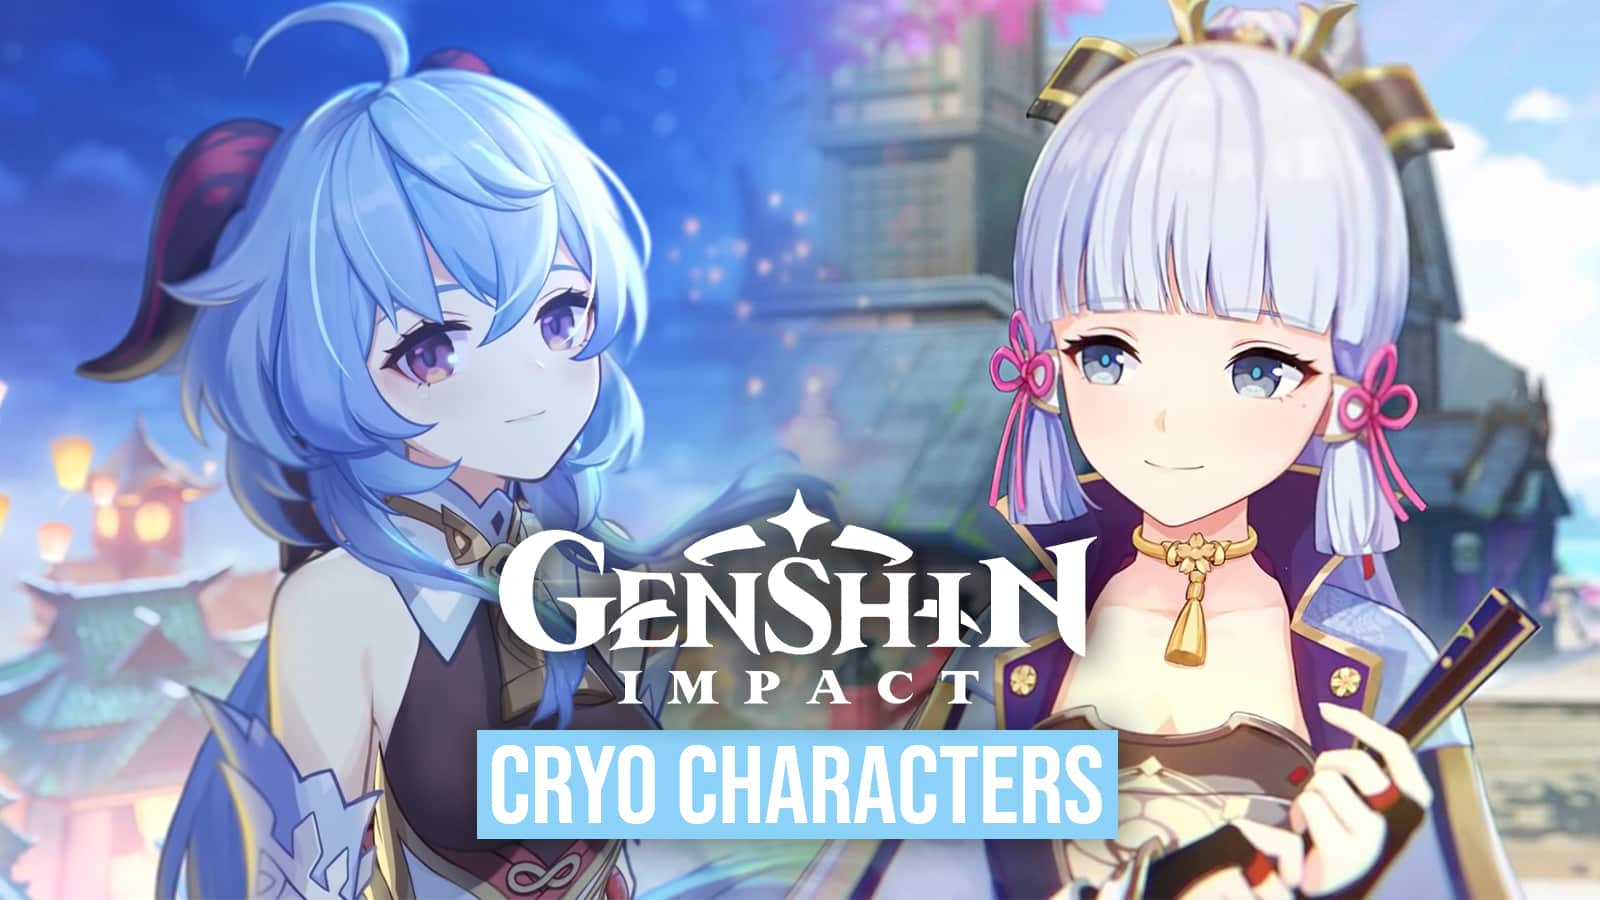 Genshin Impact: Every Cryo Character in the Game (December 2020)